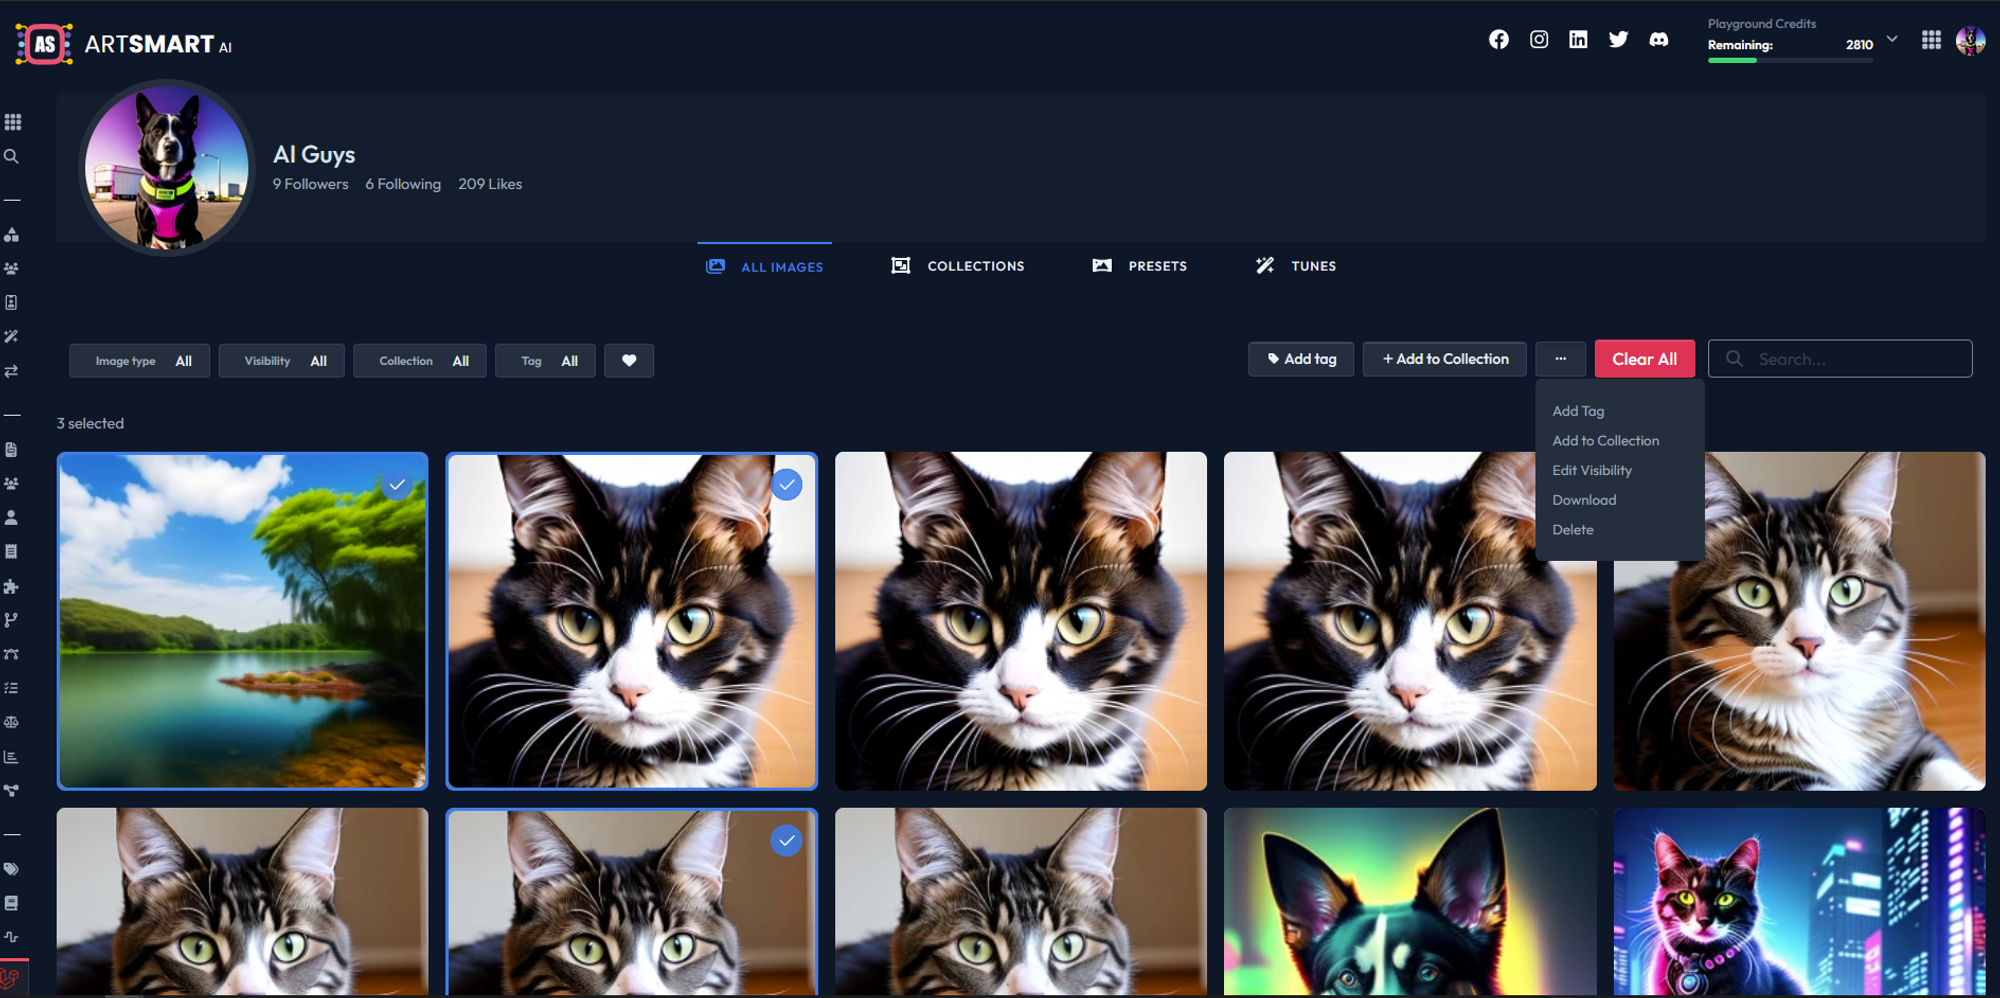 Grid view of all images and selecting images in bulk to take action on 